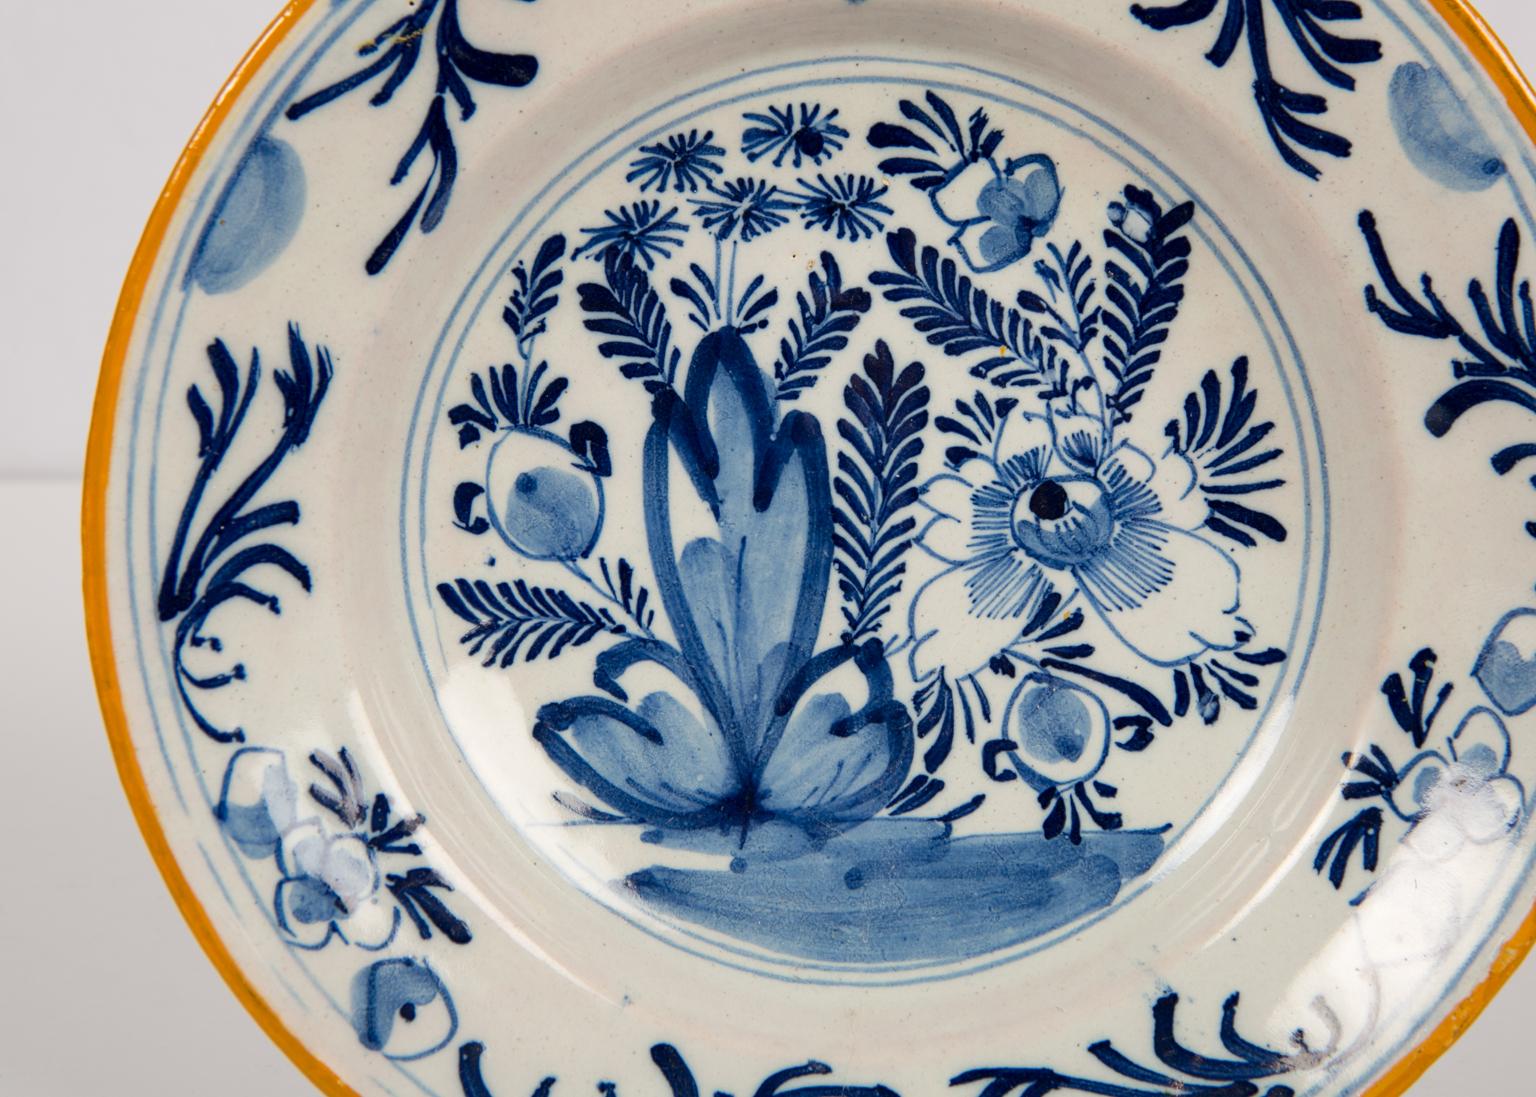 We are pleased to offer this group of three brightly painted blue and white Delft dishes with mustard yellow slip painted edges.
Each dish shows a flower-filled garden scene. We see a large peony and other flowers.
The border is decorated with